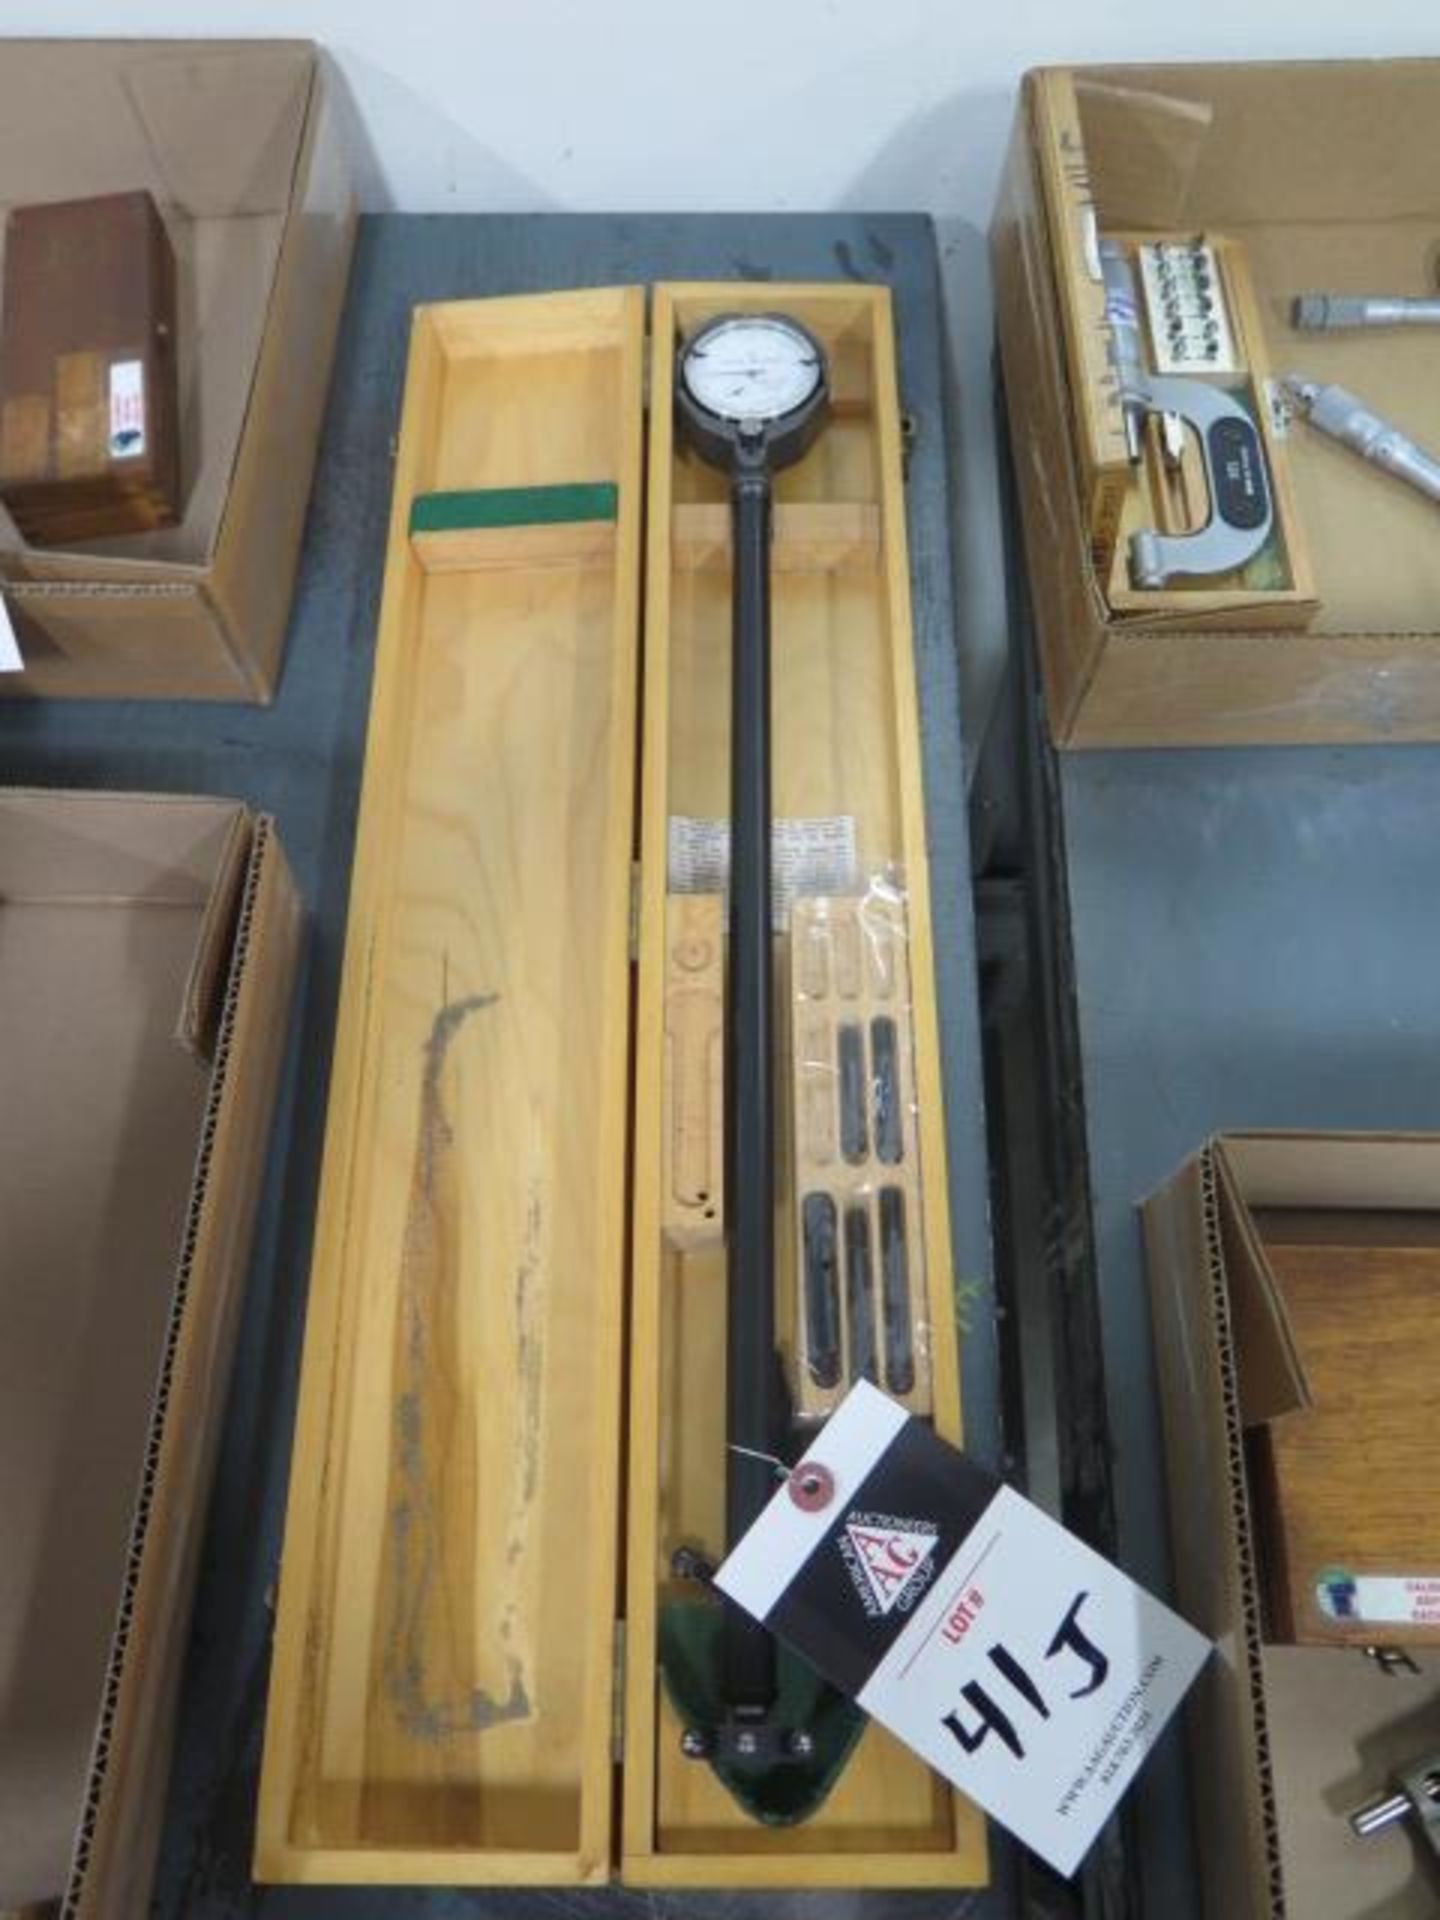 Gage Master Deep Bore Dial Bore Gage (SOLD AS-IS - NO WARRANTY) - Image 2 of 5